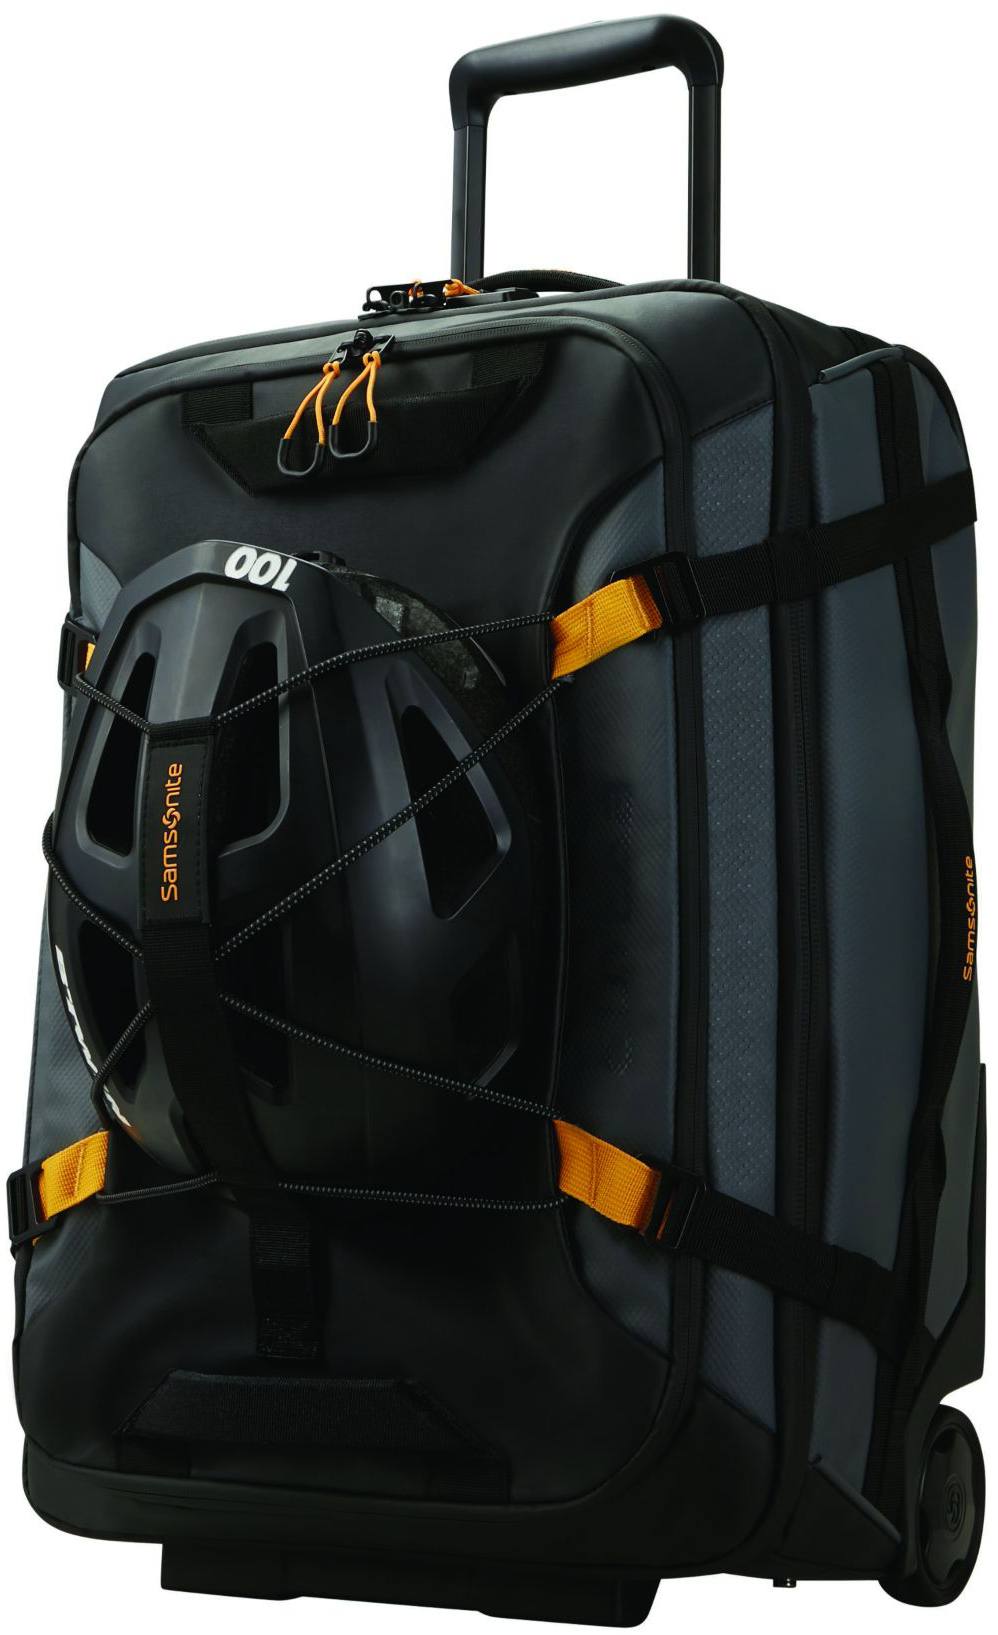 Outlab Paradiver Duffle 55 Wheel Backpack Black